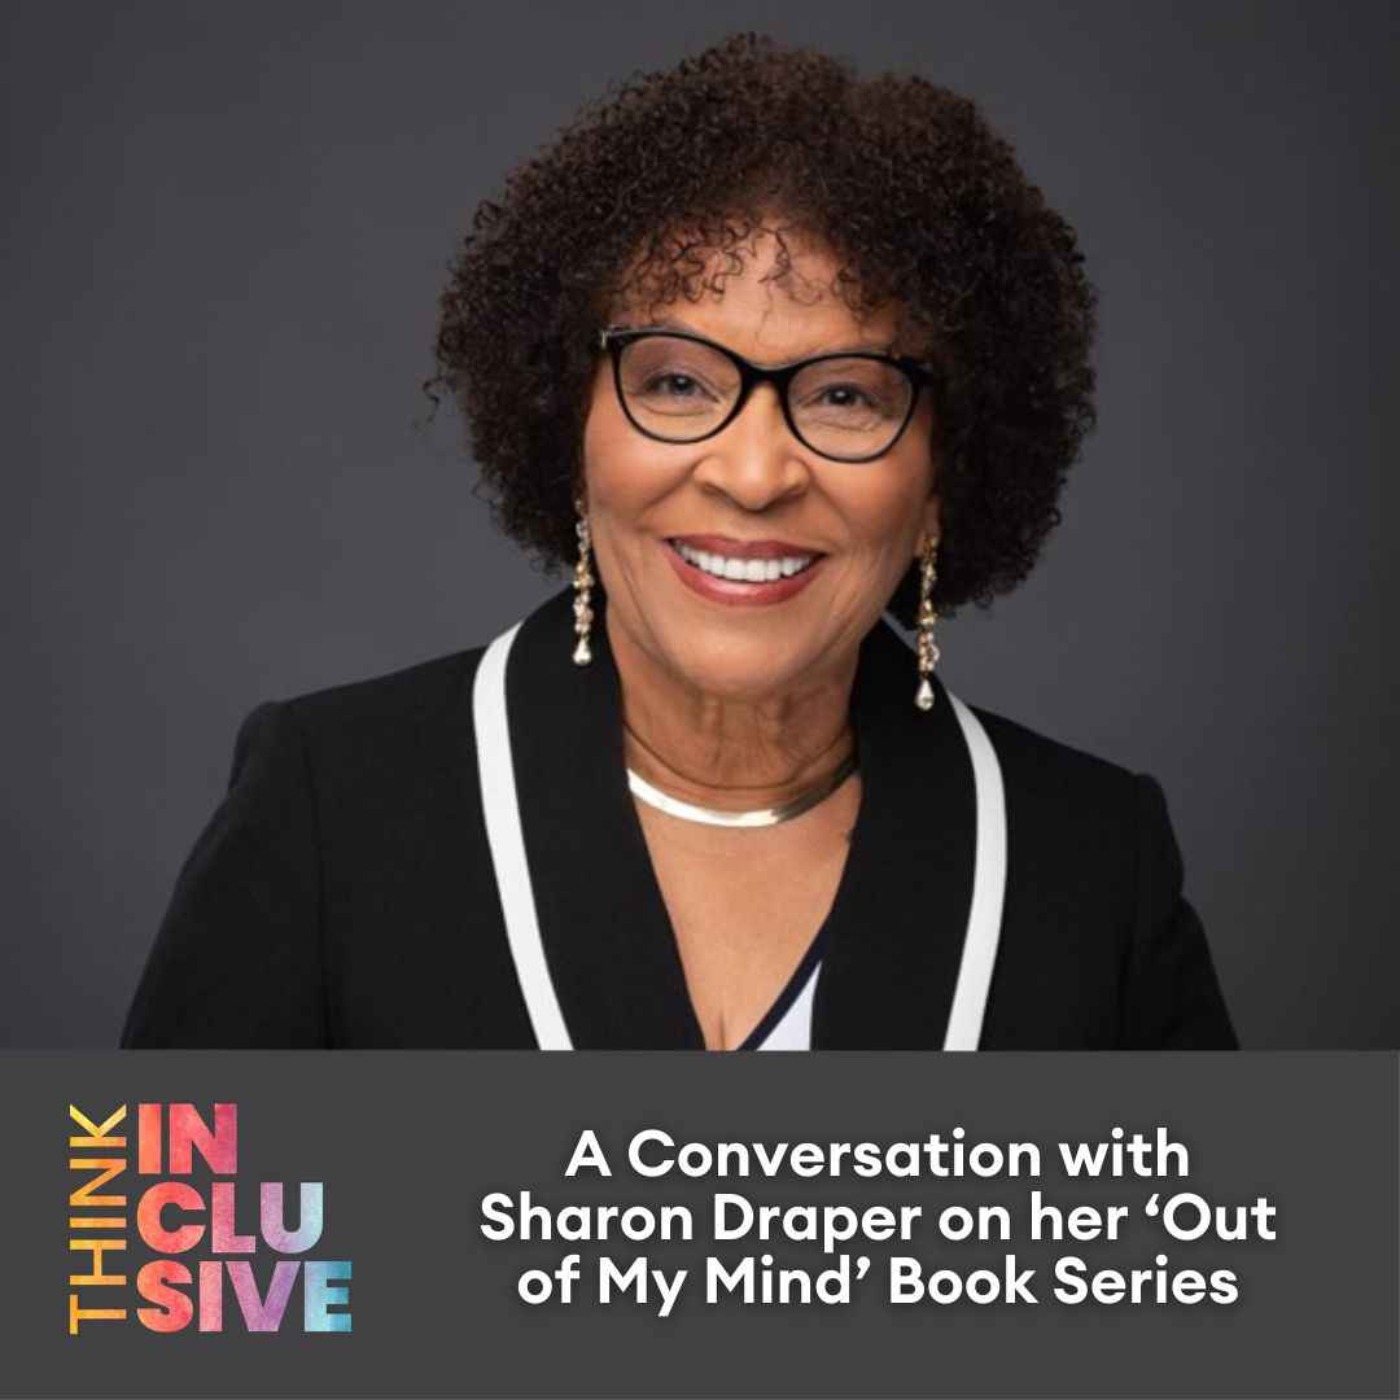 A Conversation with Sharon Draper on her 'Out of My Mind' Book Series